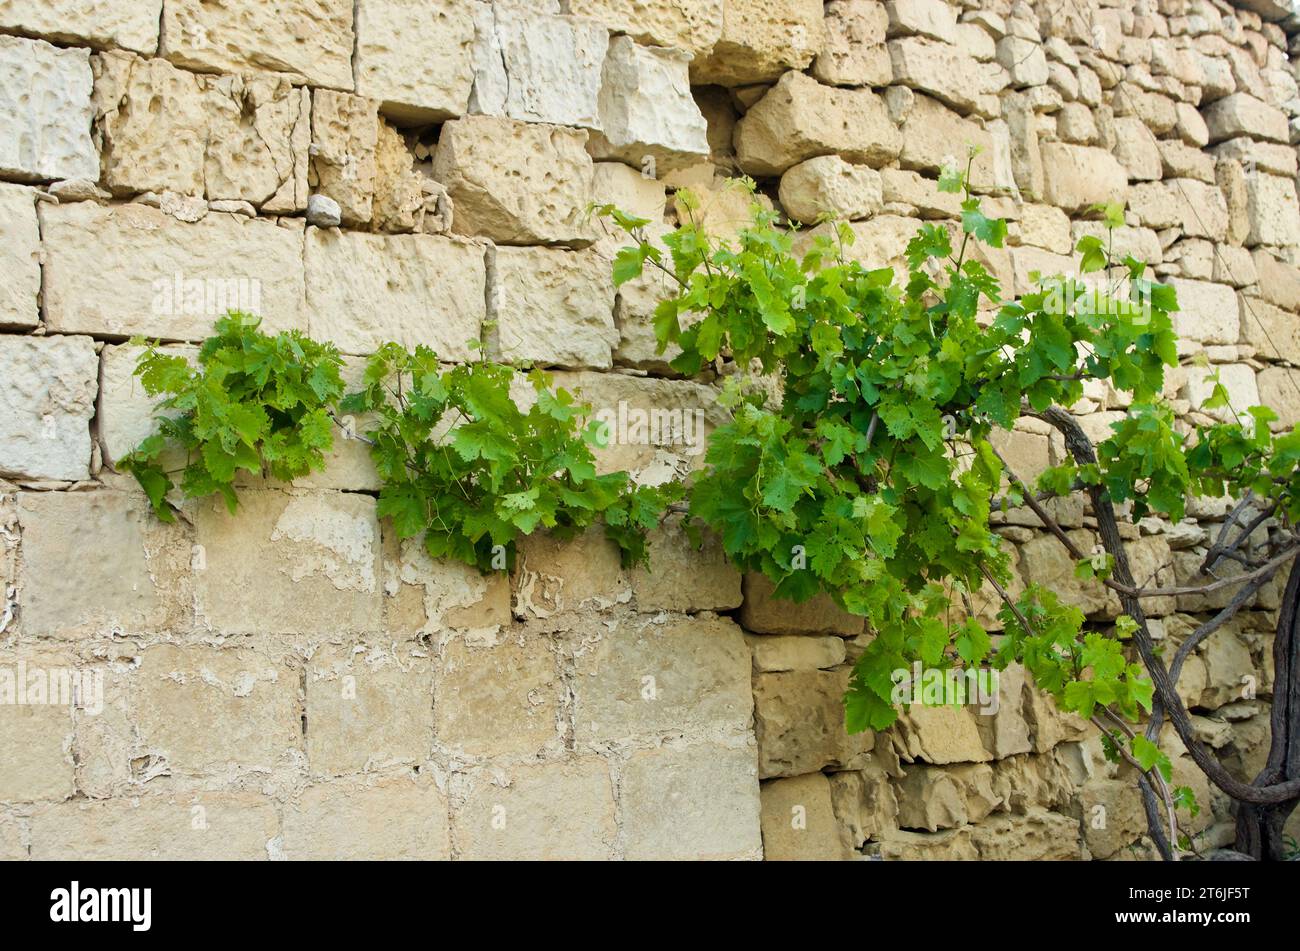 Green vine plant with branches climbing on a building with stone walls on the island Malta in spring. Stock Photo